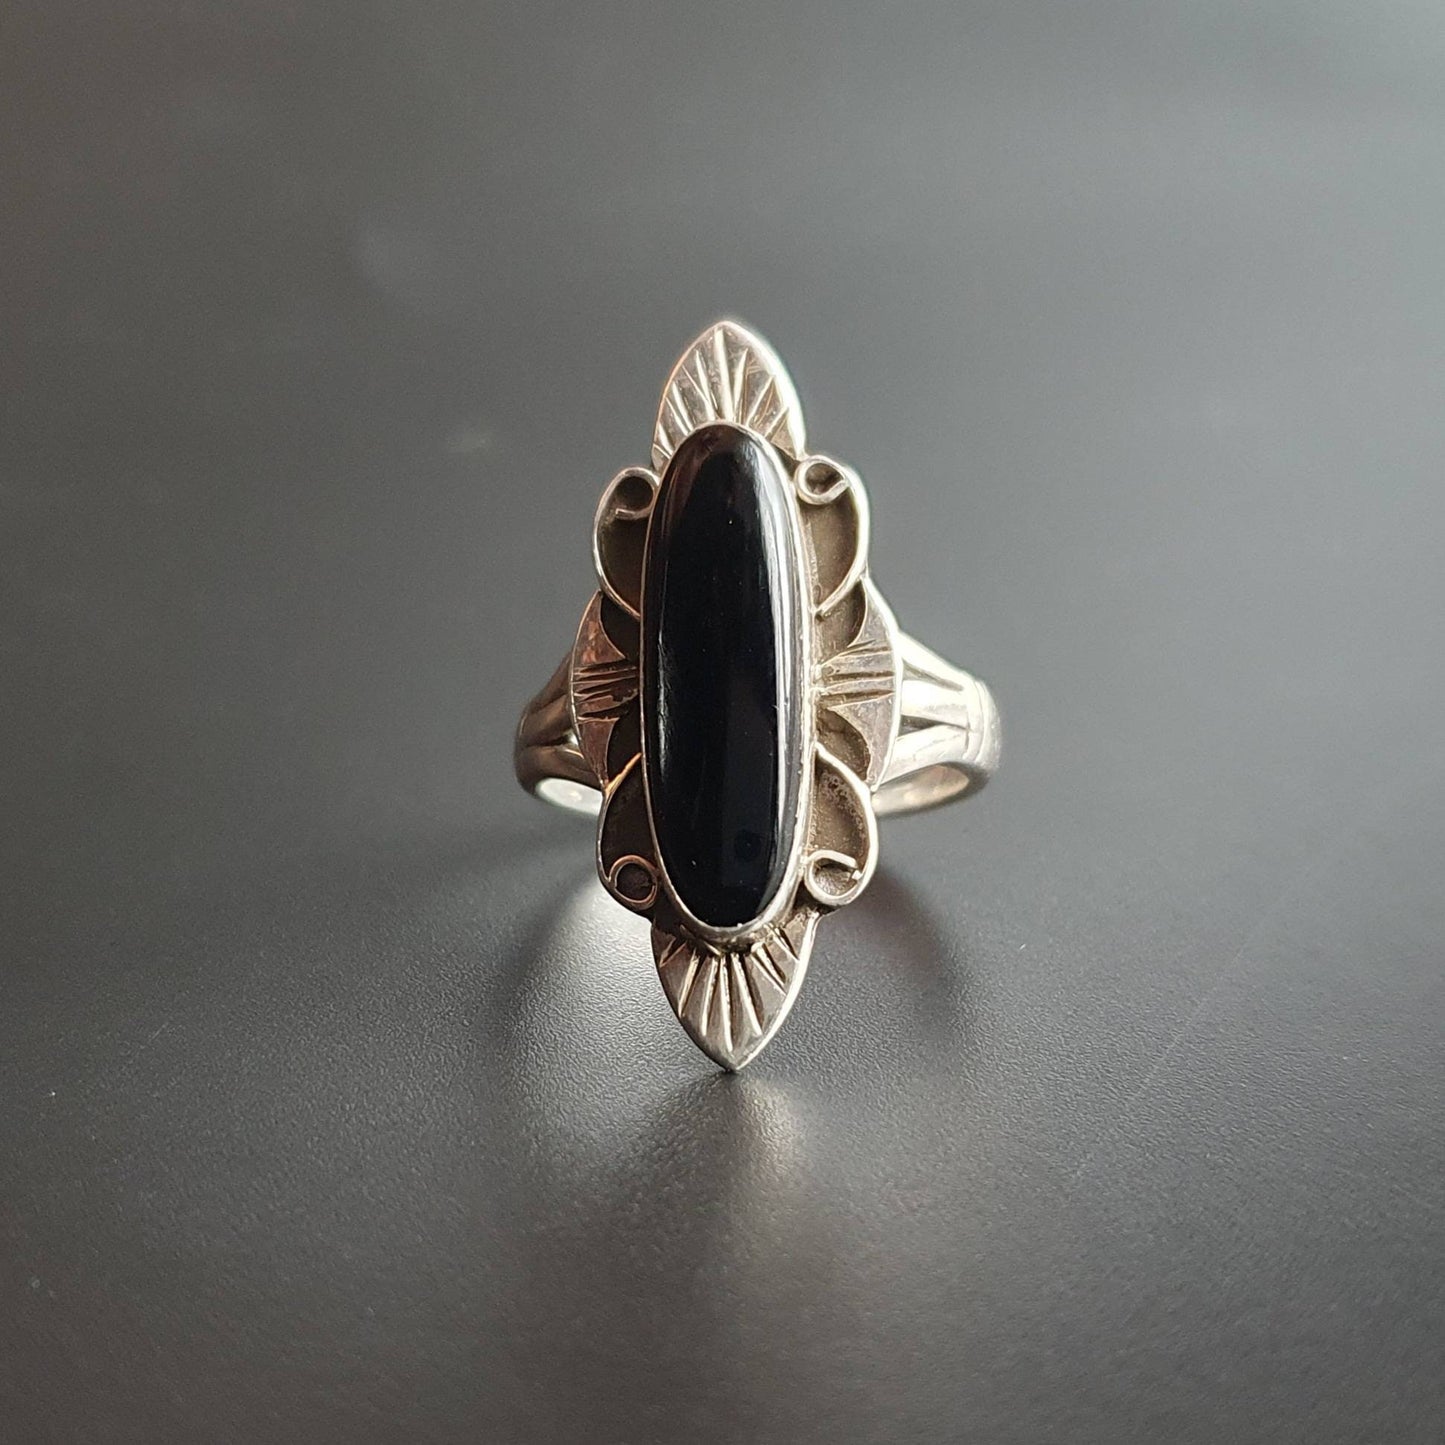 Sterling silver ring,onyx,ring, vintage, Navajo, jewellery,long ring, handmade, southwest, classical, gifts, witchy, antique, vintage ring